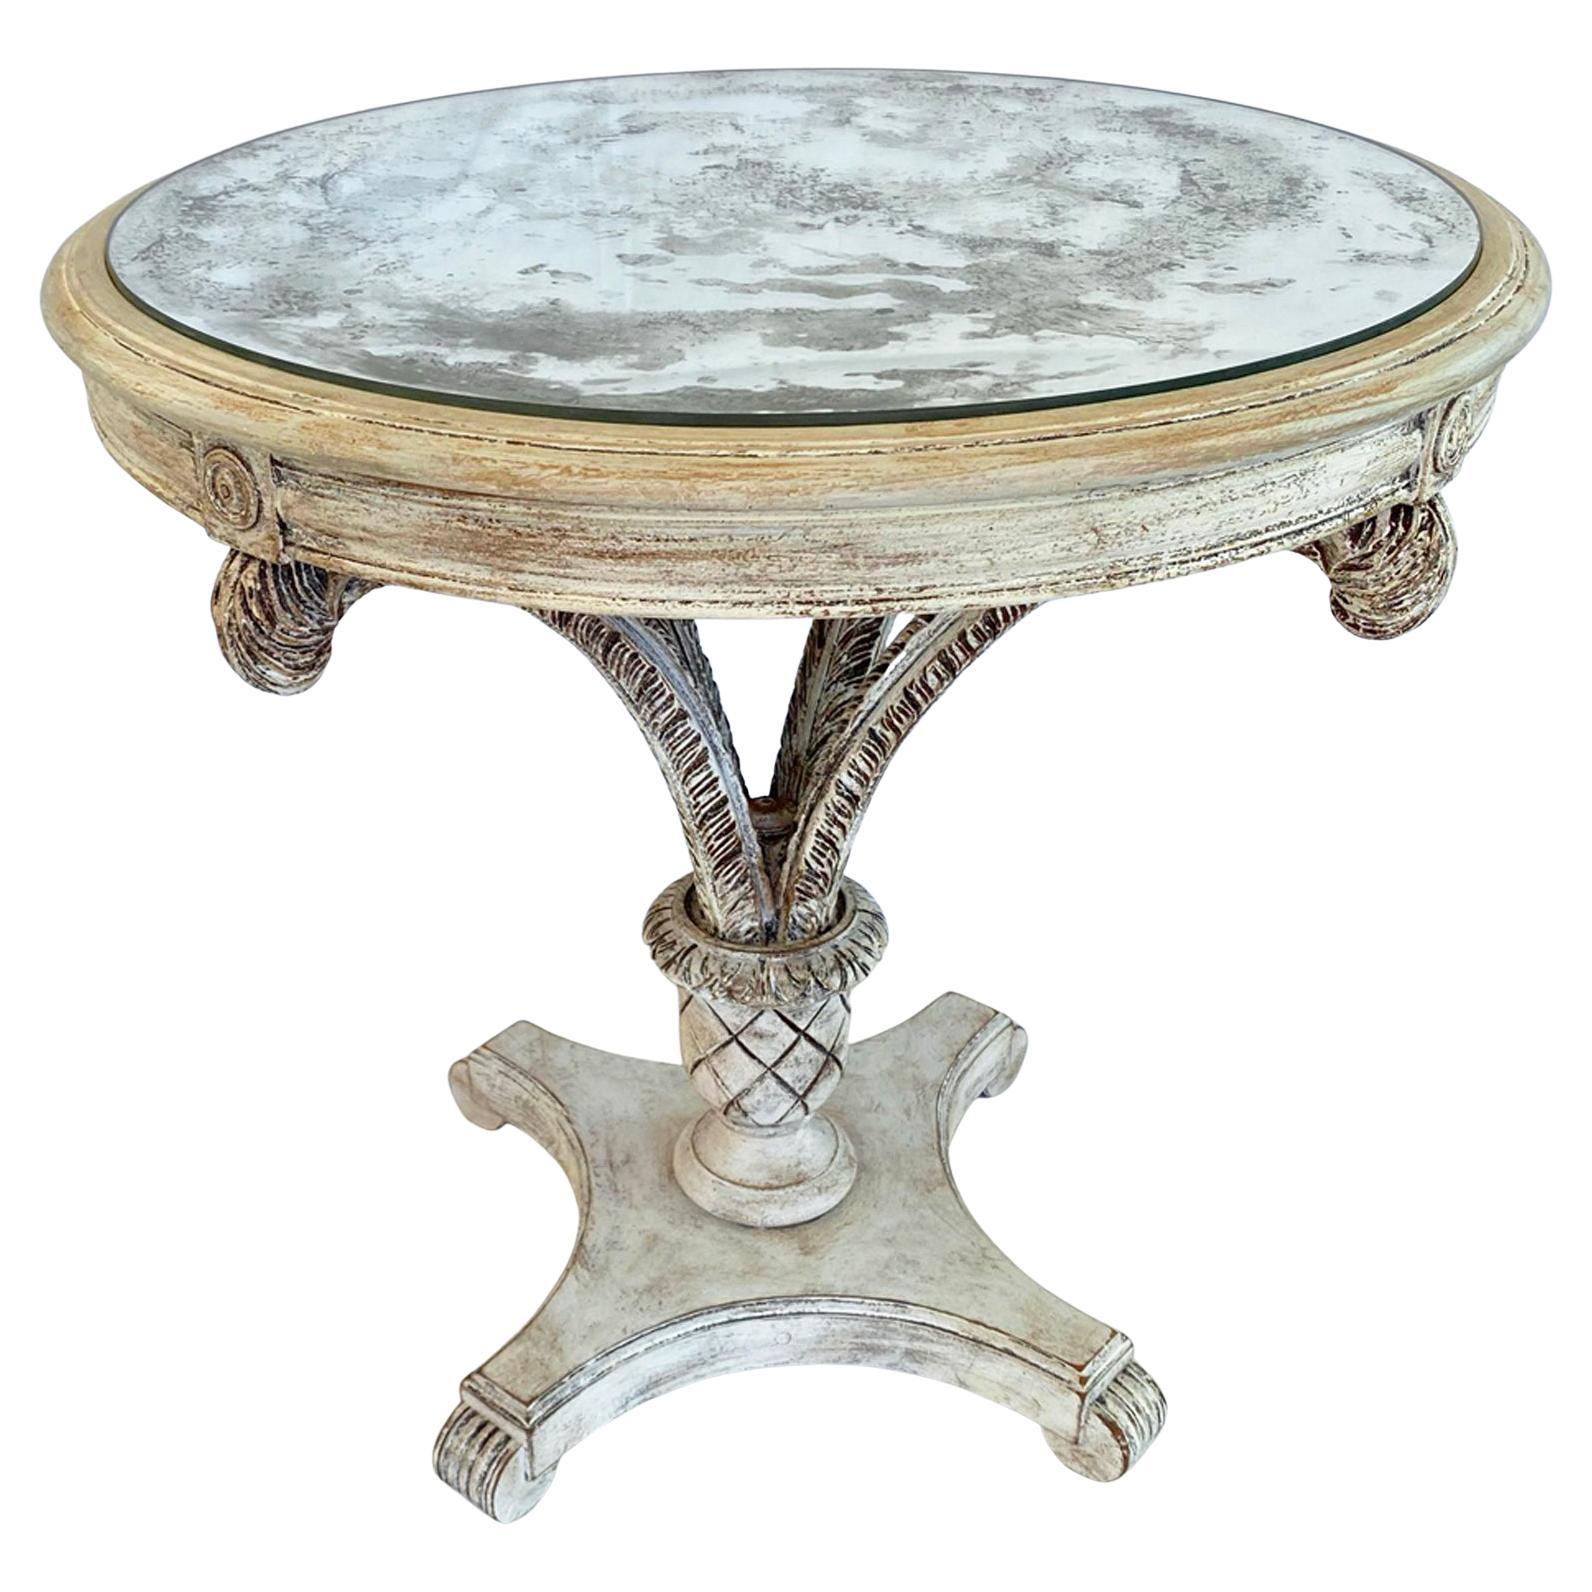 Pickled Wood "Duke of Windsor" Round Occasional Table with Aged Mirrored Top